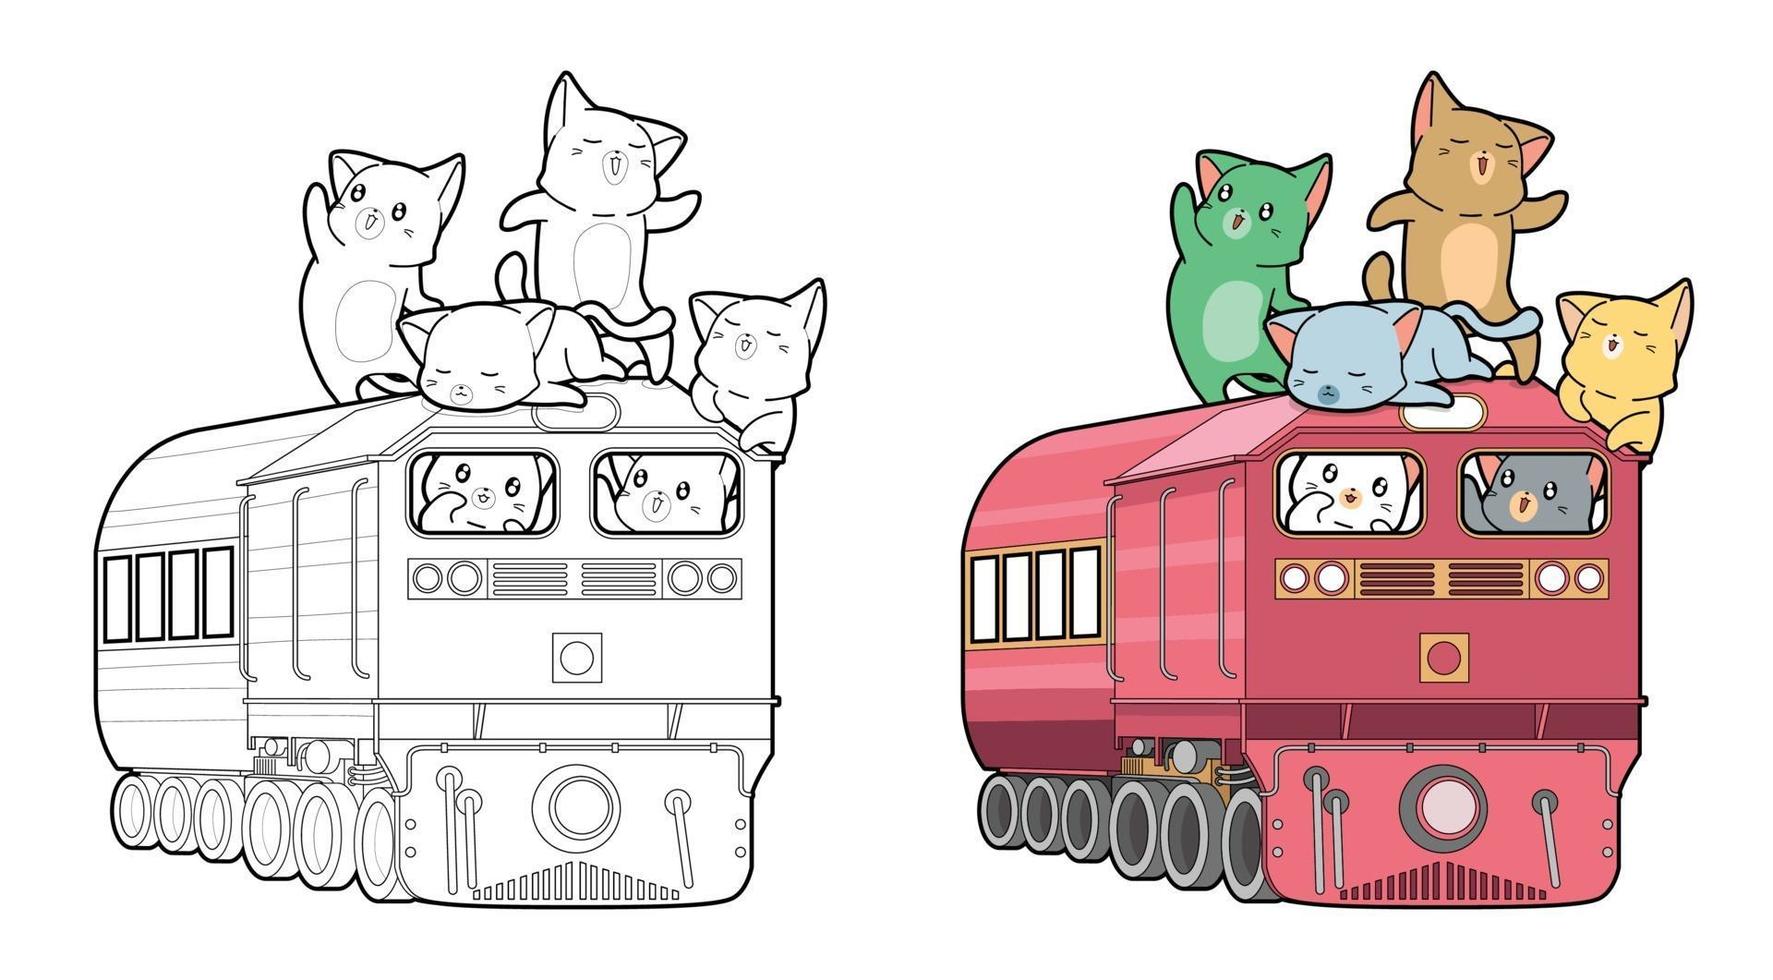 Cats on the locomotive cartoon coloring page for kids vector